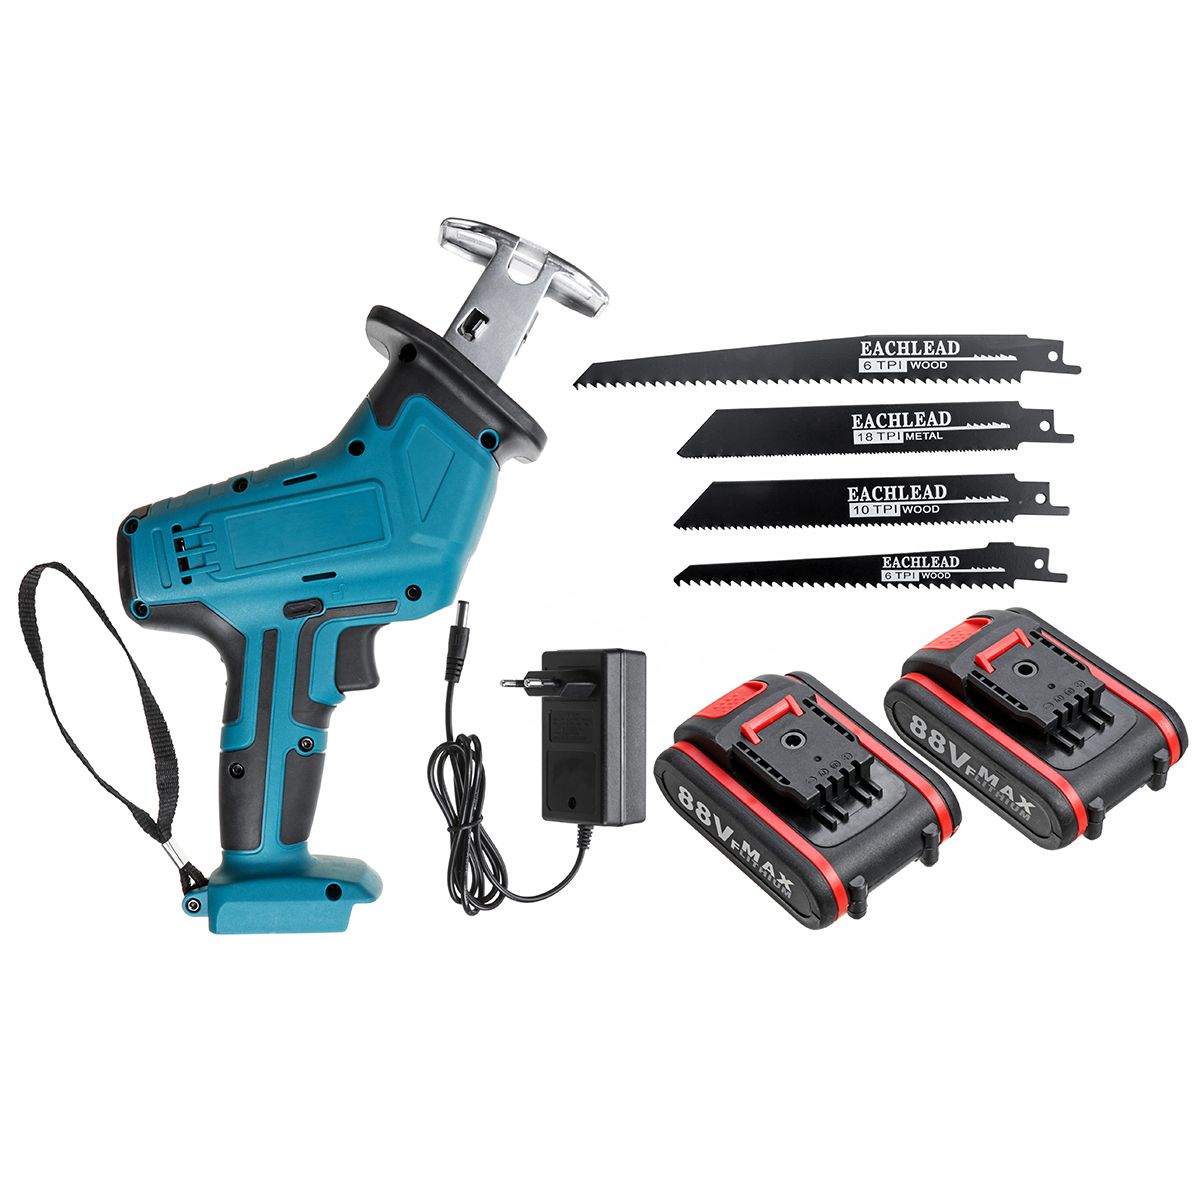 110-220V-Electric-Cordless-Saber-Saw-2-Batteries-With-1-Charger-Reciprocating-Saw-Body-Only-Cutting--1733497